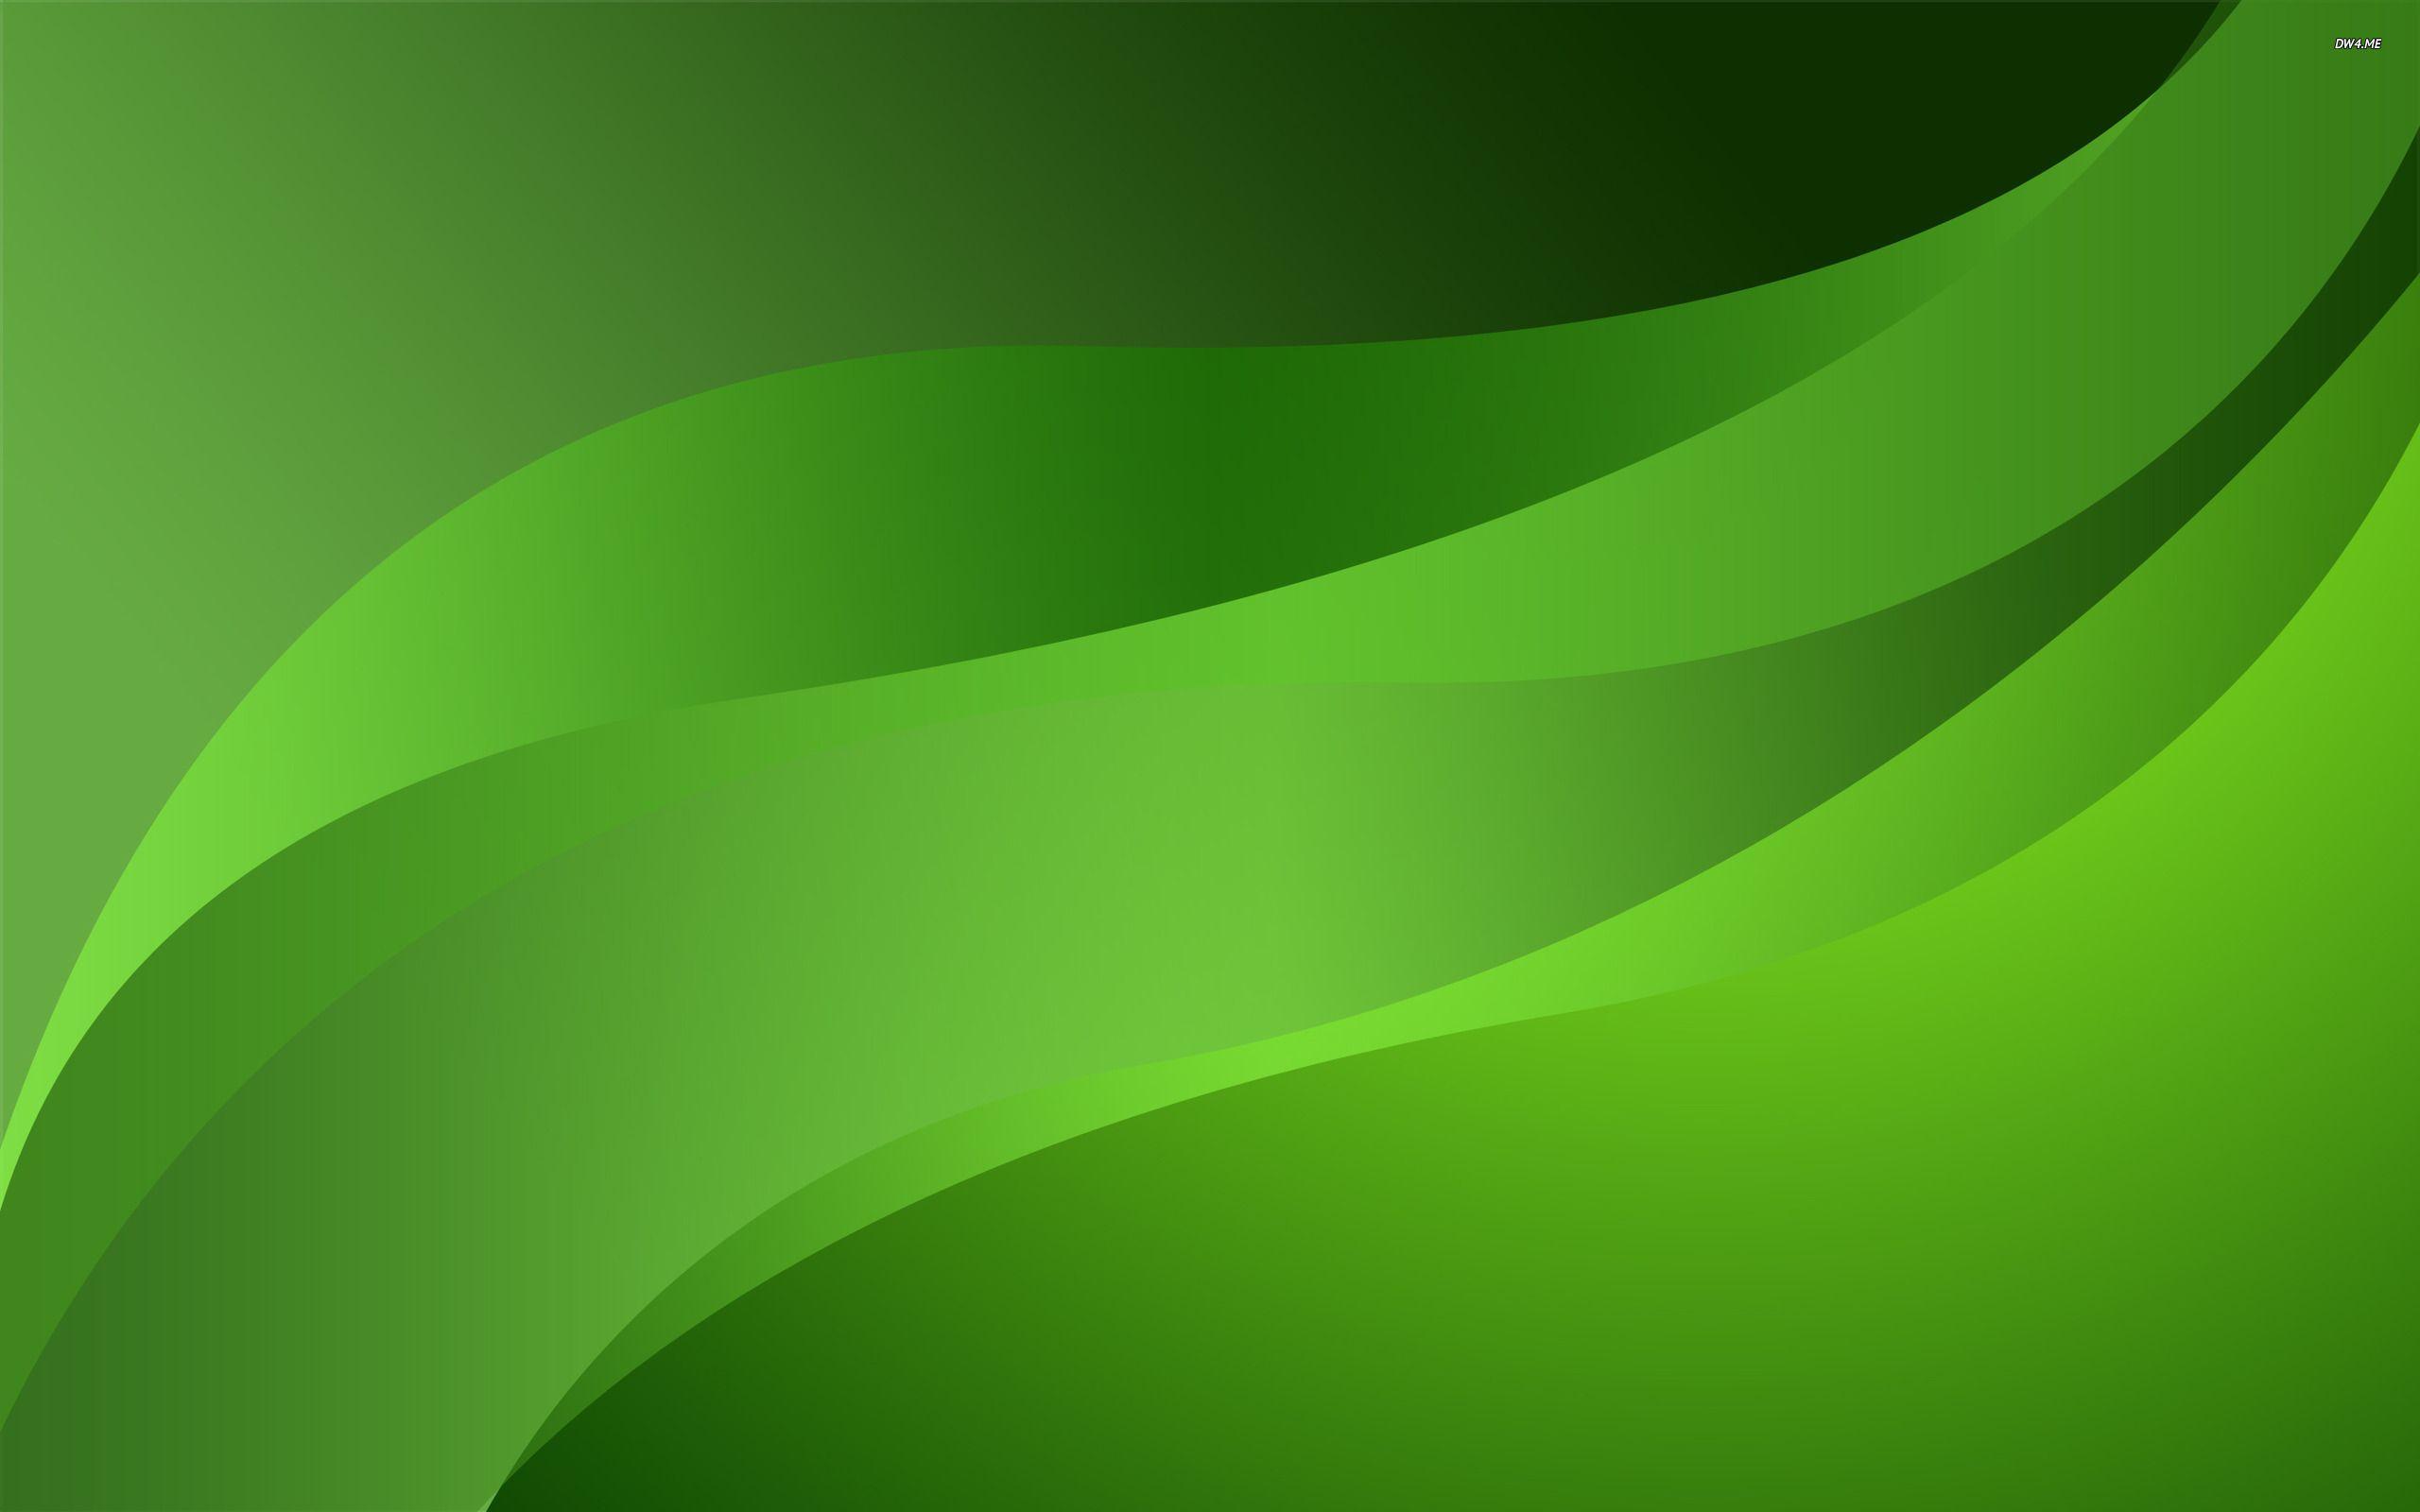 Widescreen HD Wallpaper of Green for Windows and Mac Systems